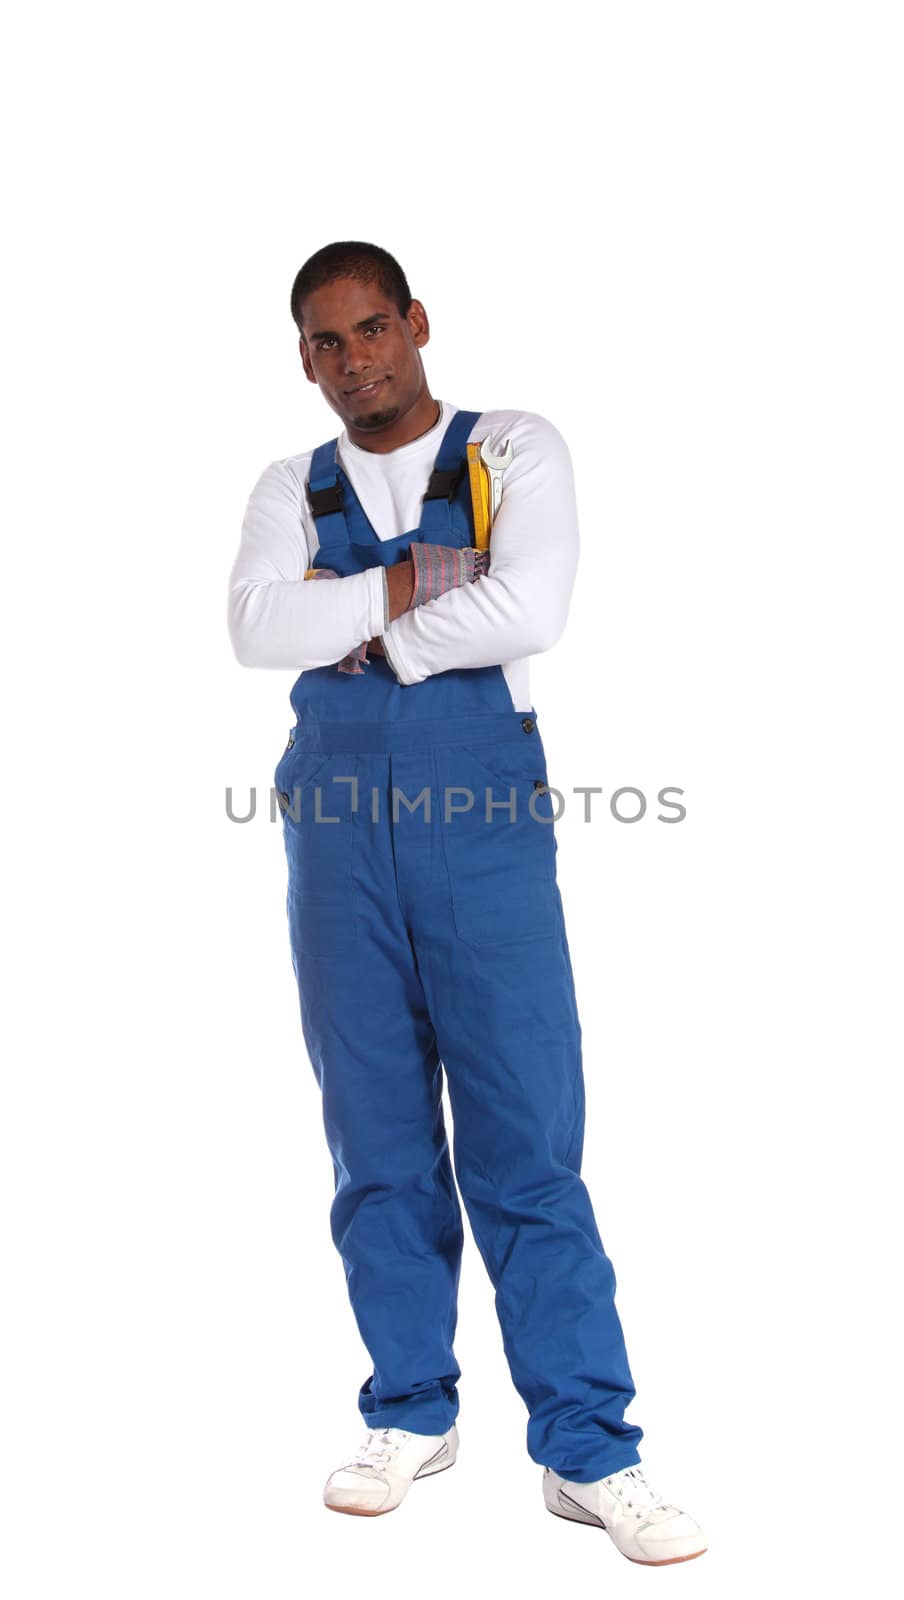 An ambitious dark-skinned worker standing. All on white background.